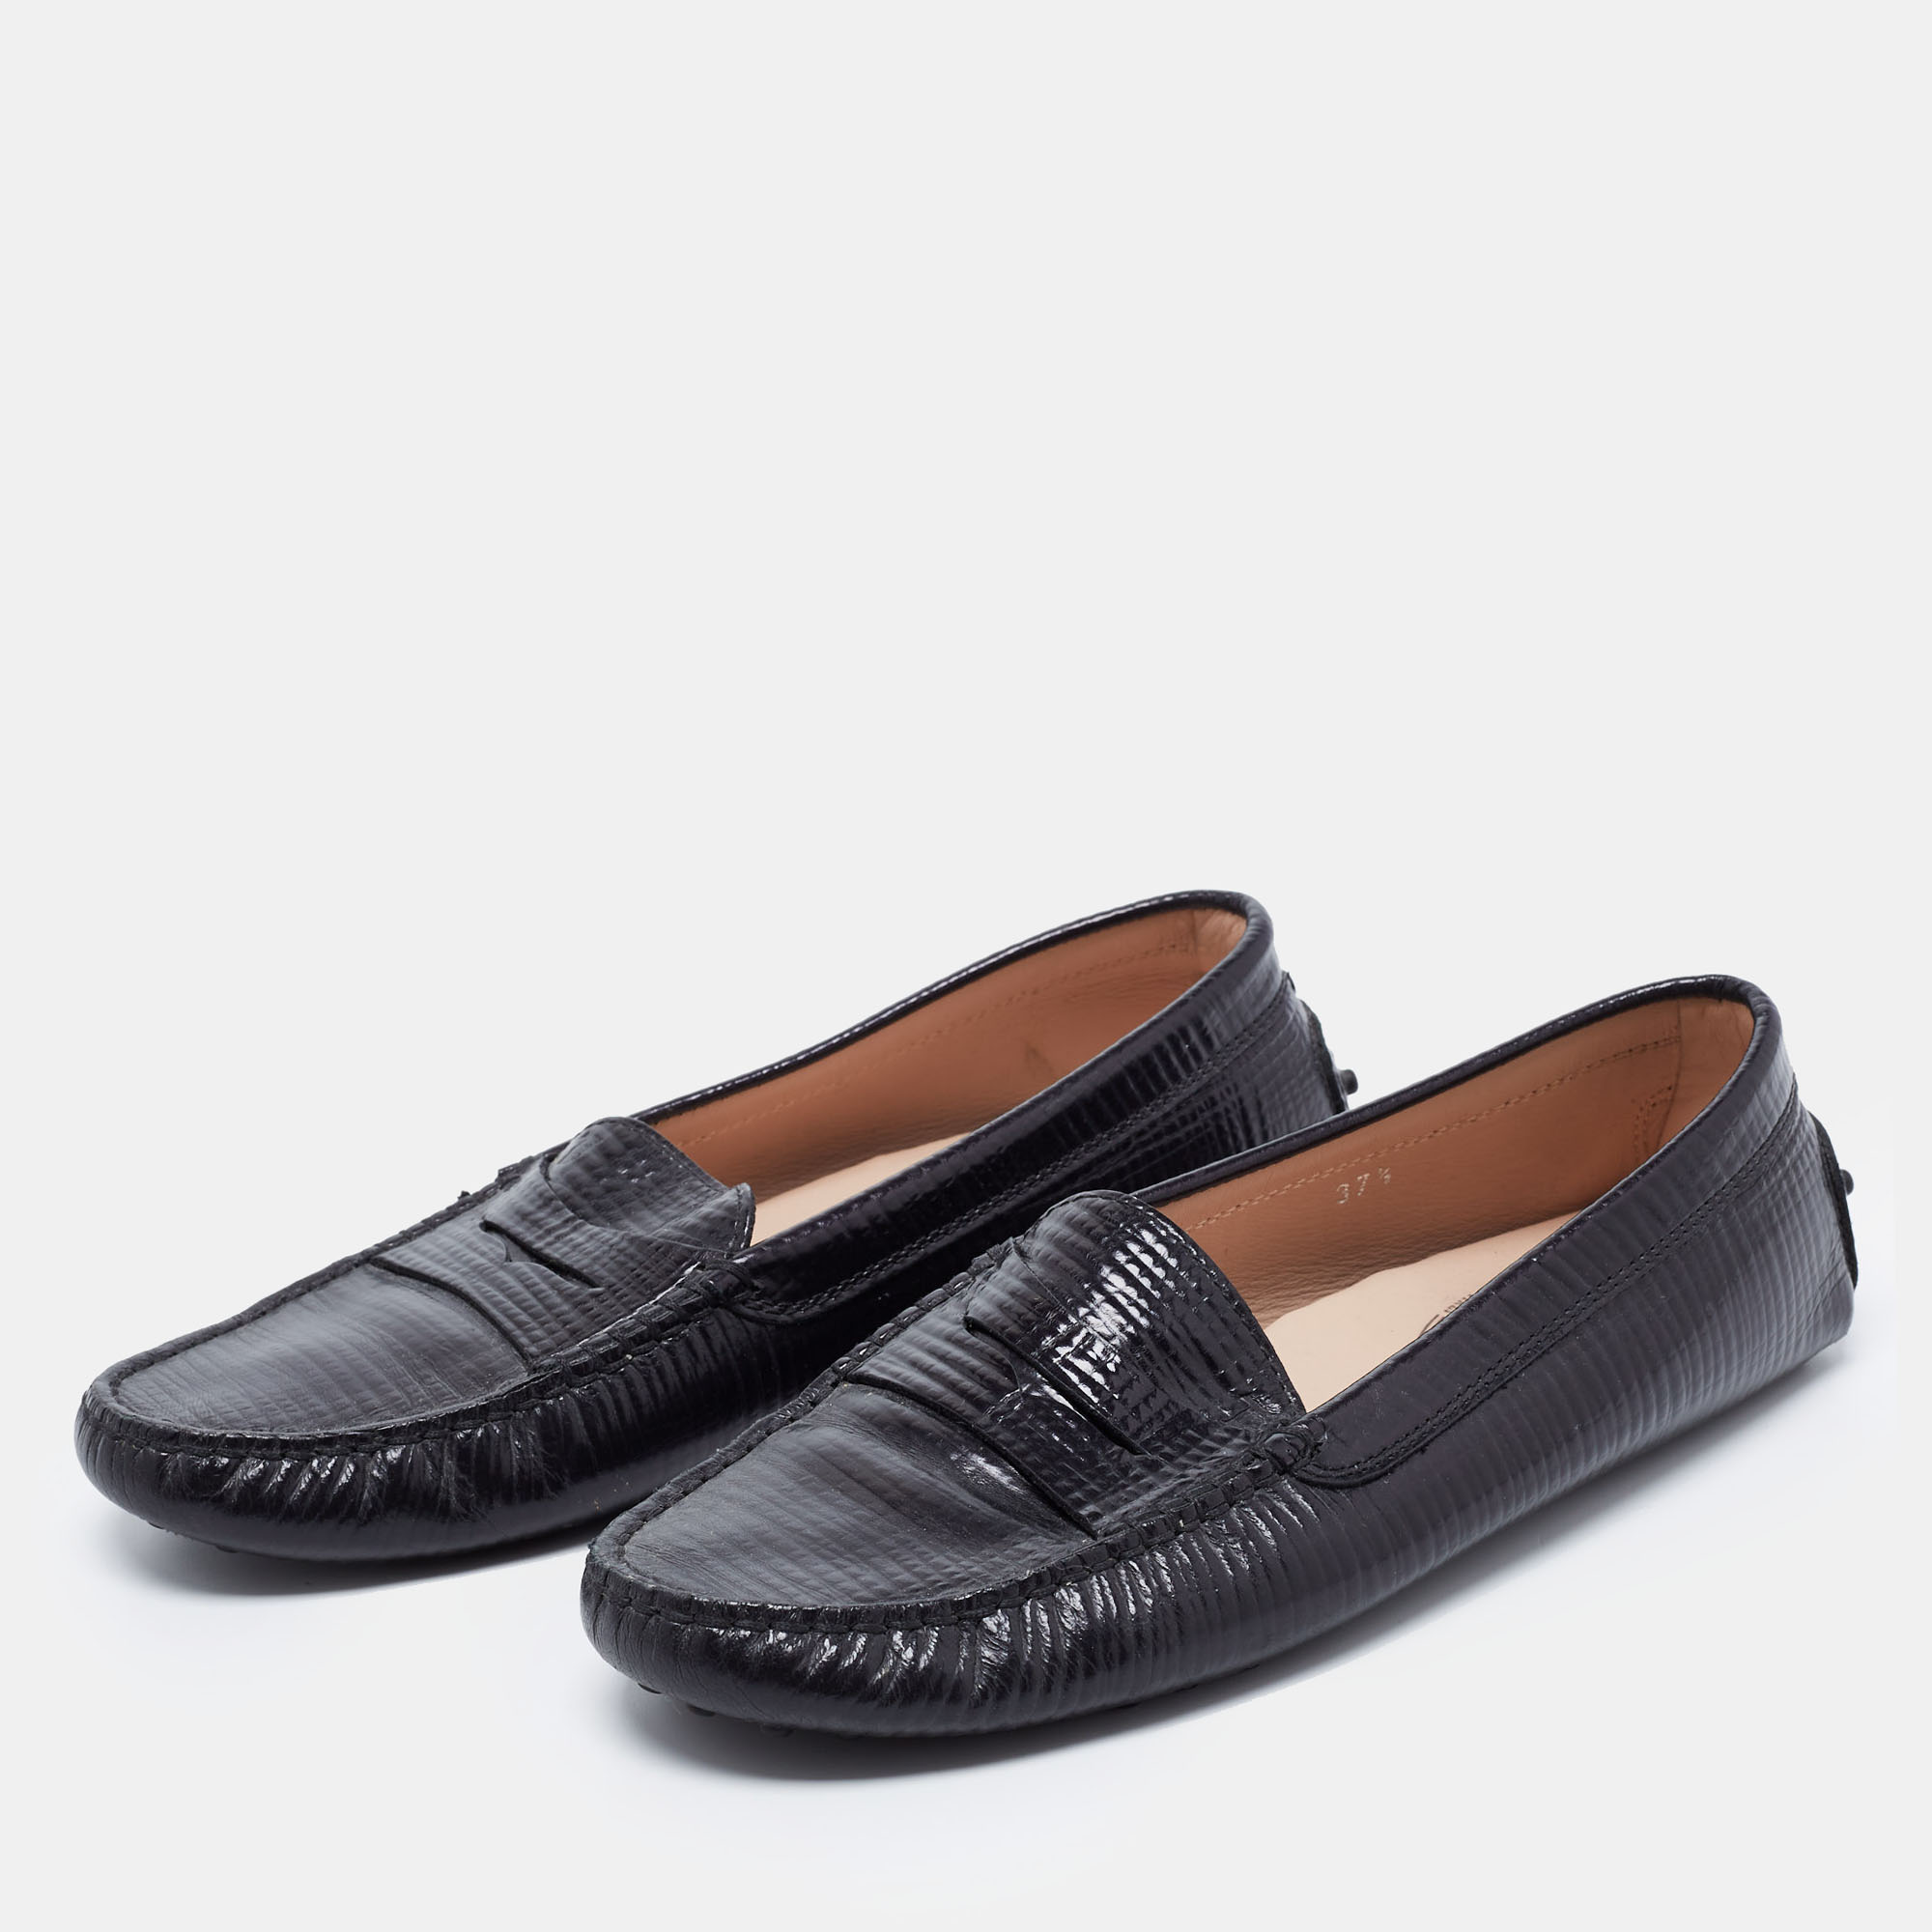 

Tod's Black Textured Leather Penny Loafers Size